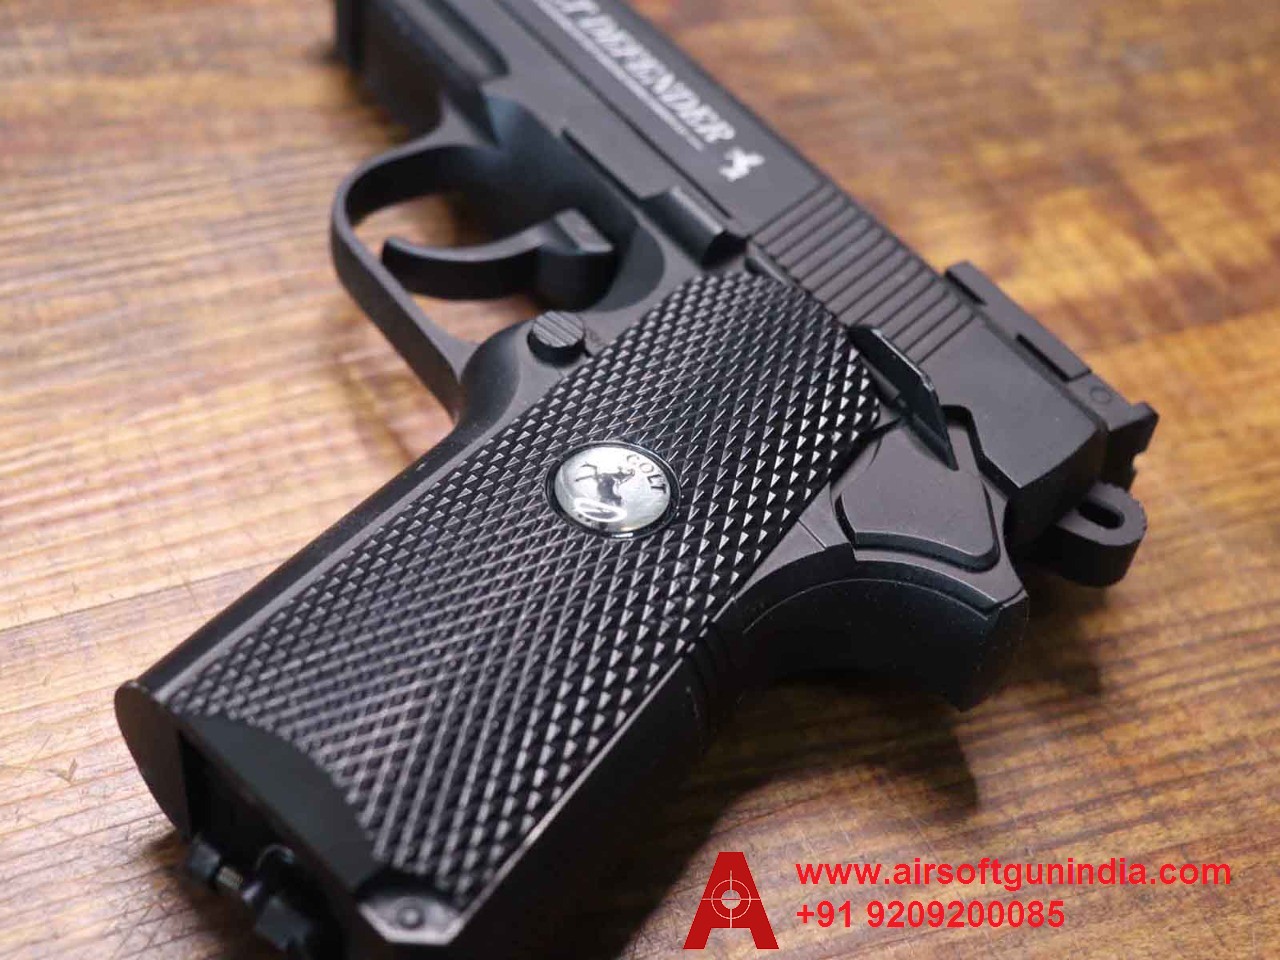 Colt Defender co2 BB Air pistol in india by Airsoft gun india - Airsoft ...